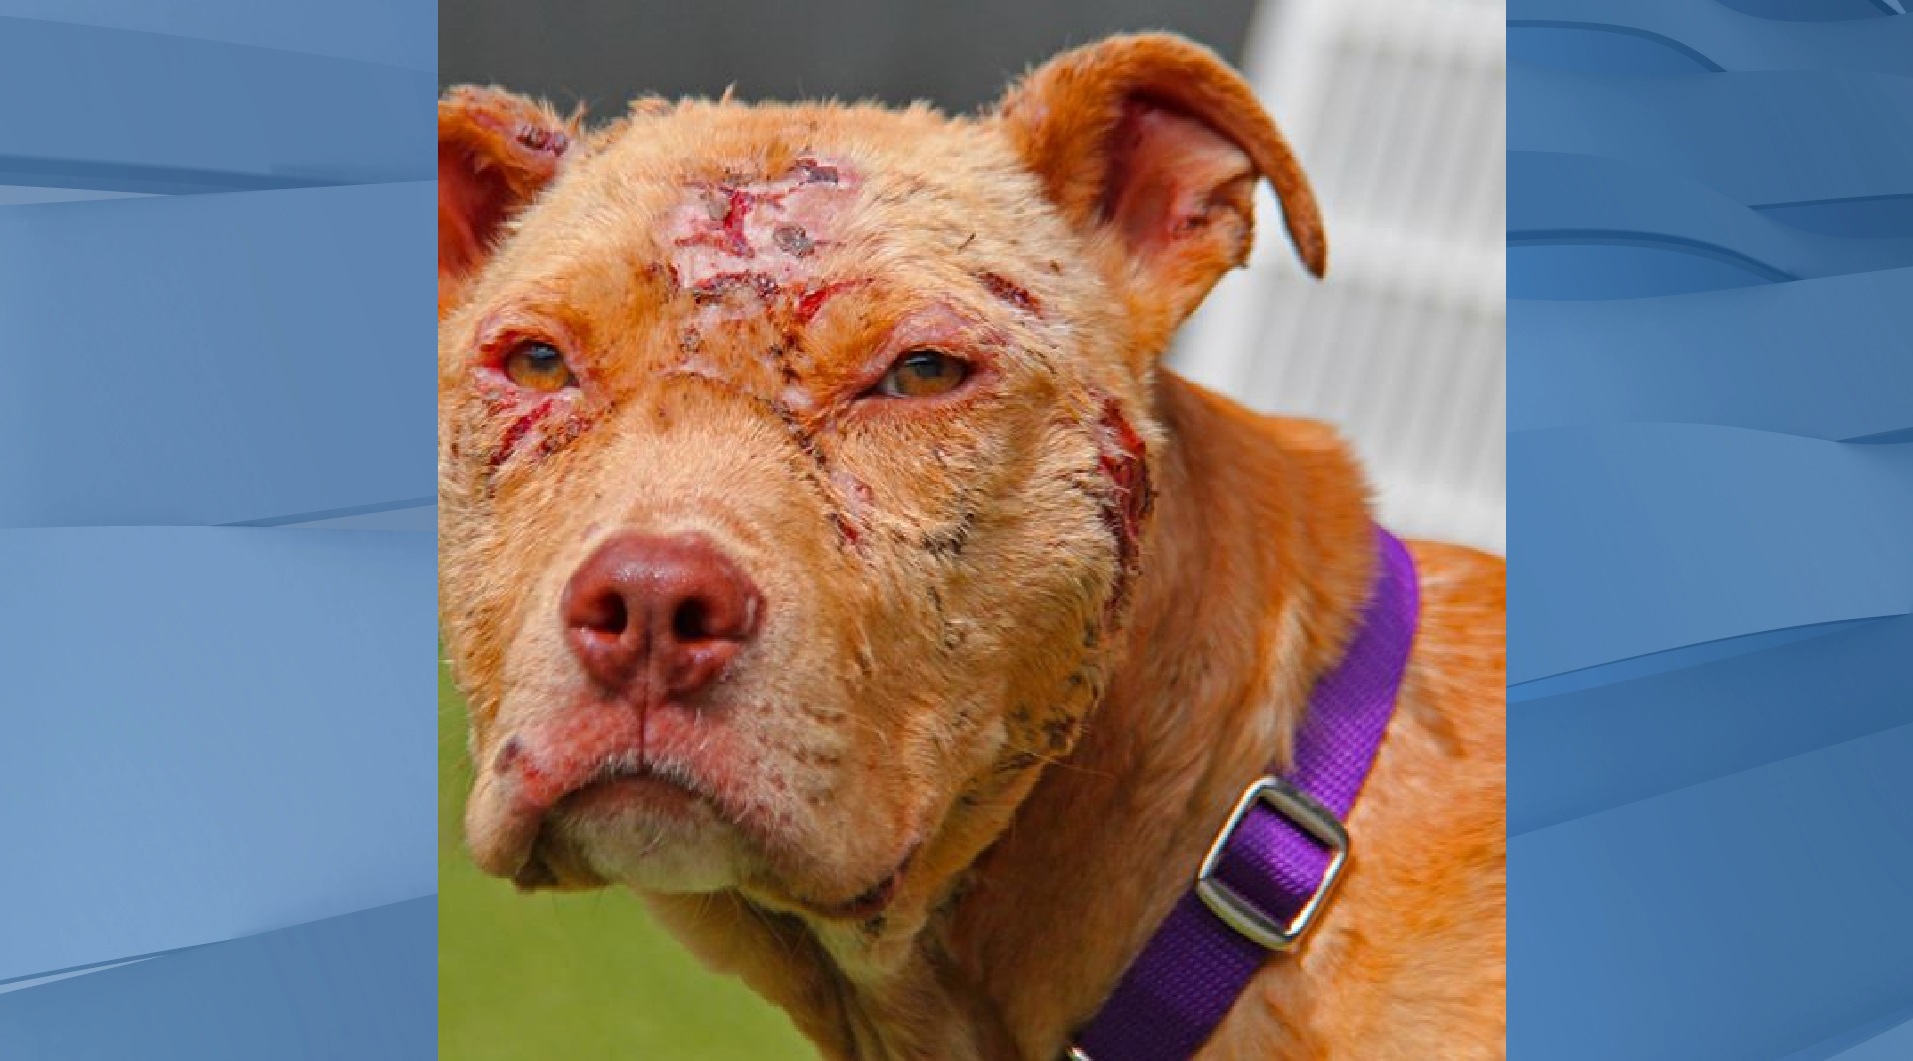 Investigators searching for animal abusers as humane  